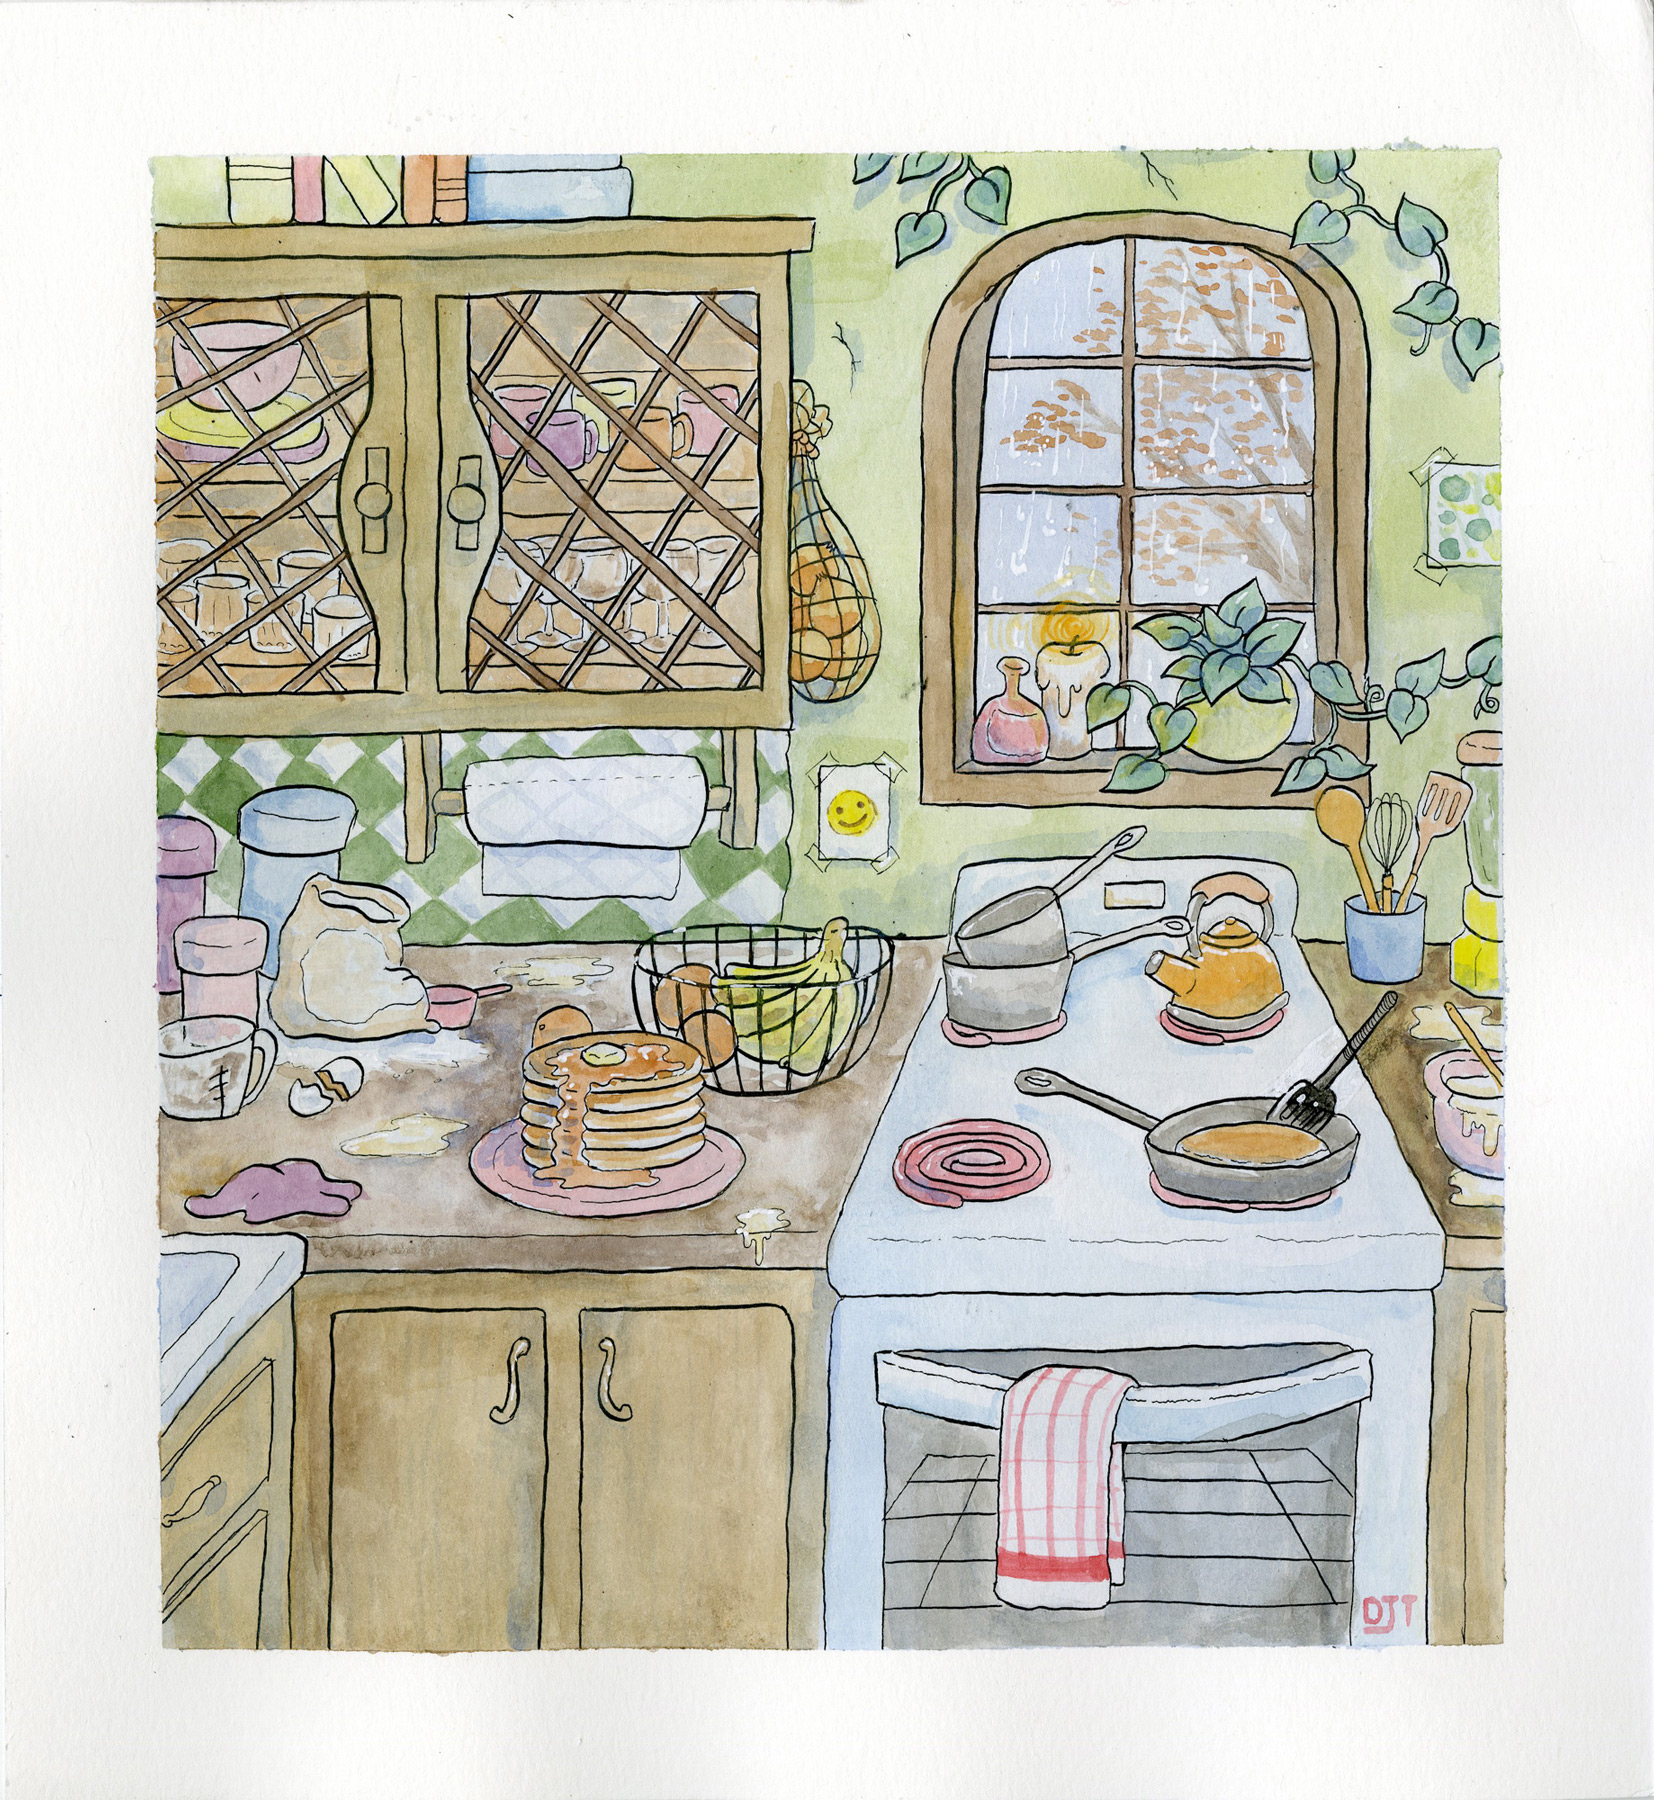 Illustration of a kitchen with a meal cooking on the stove